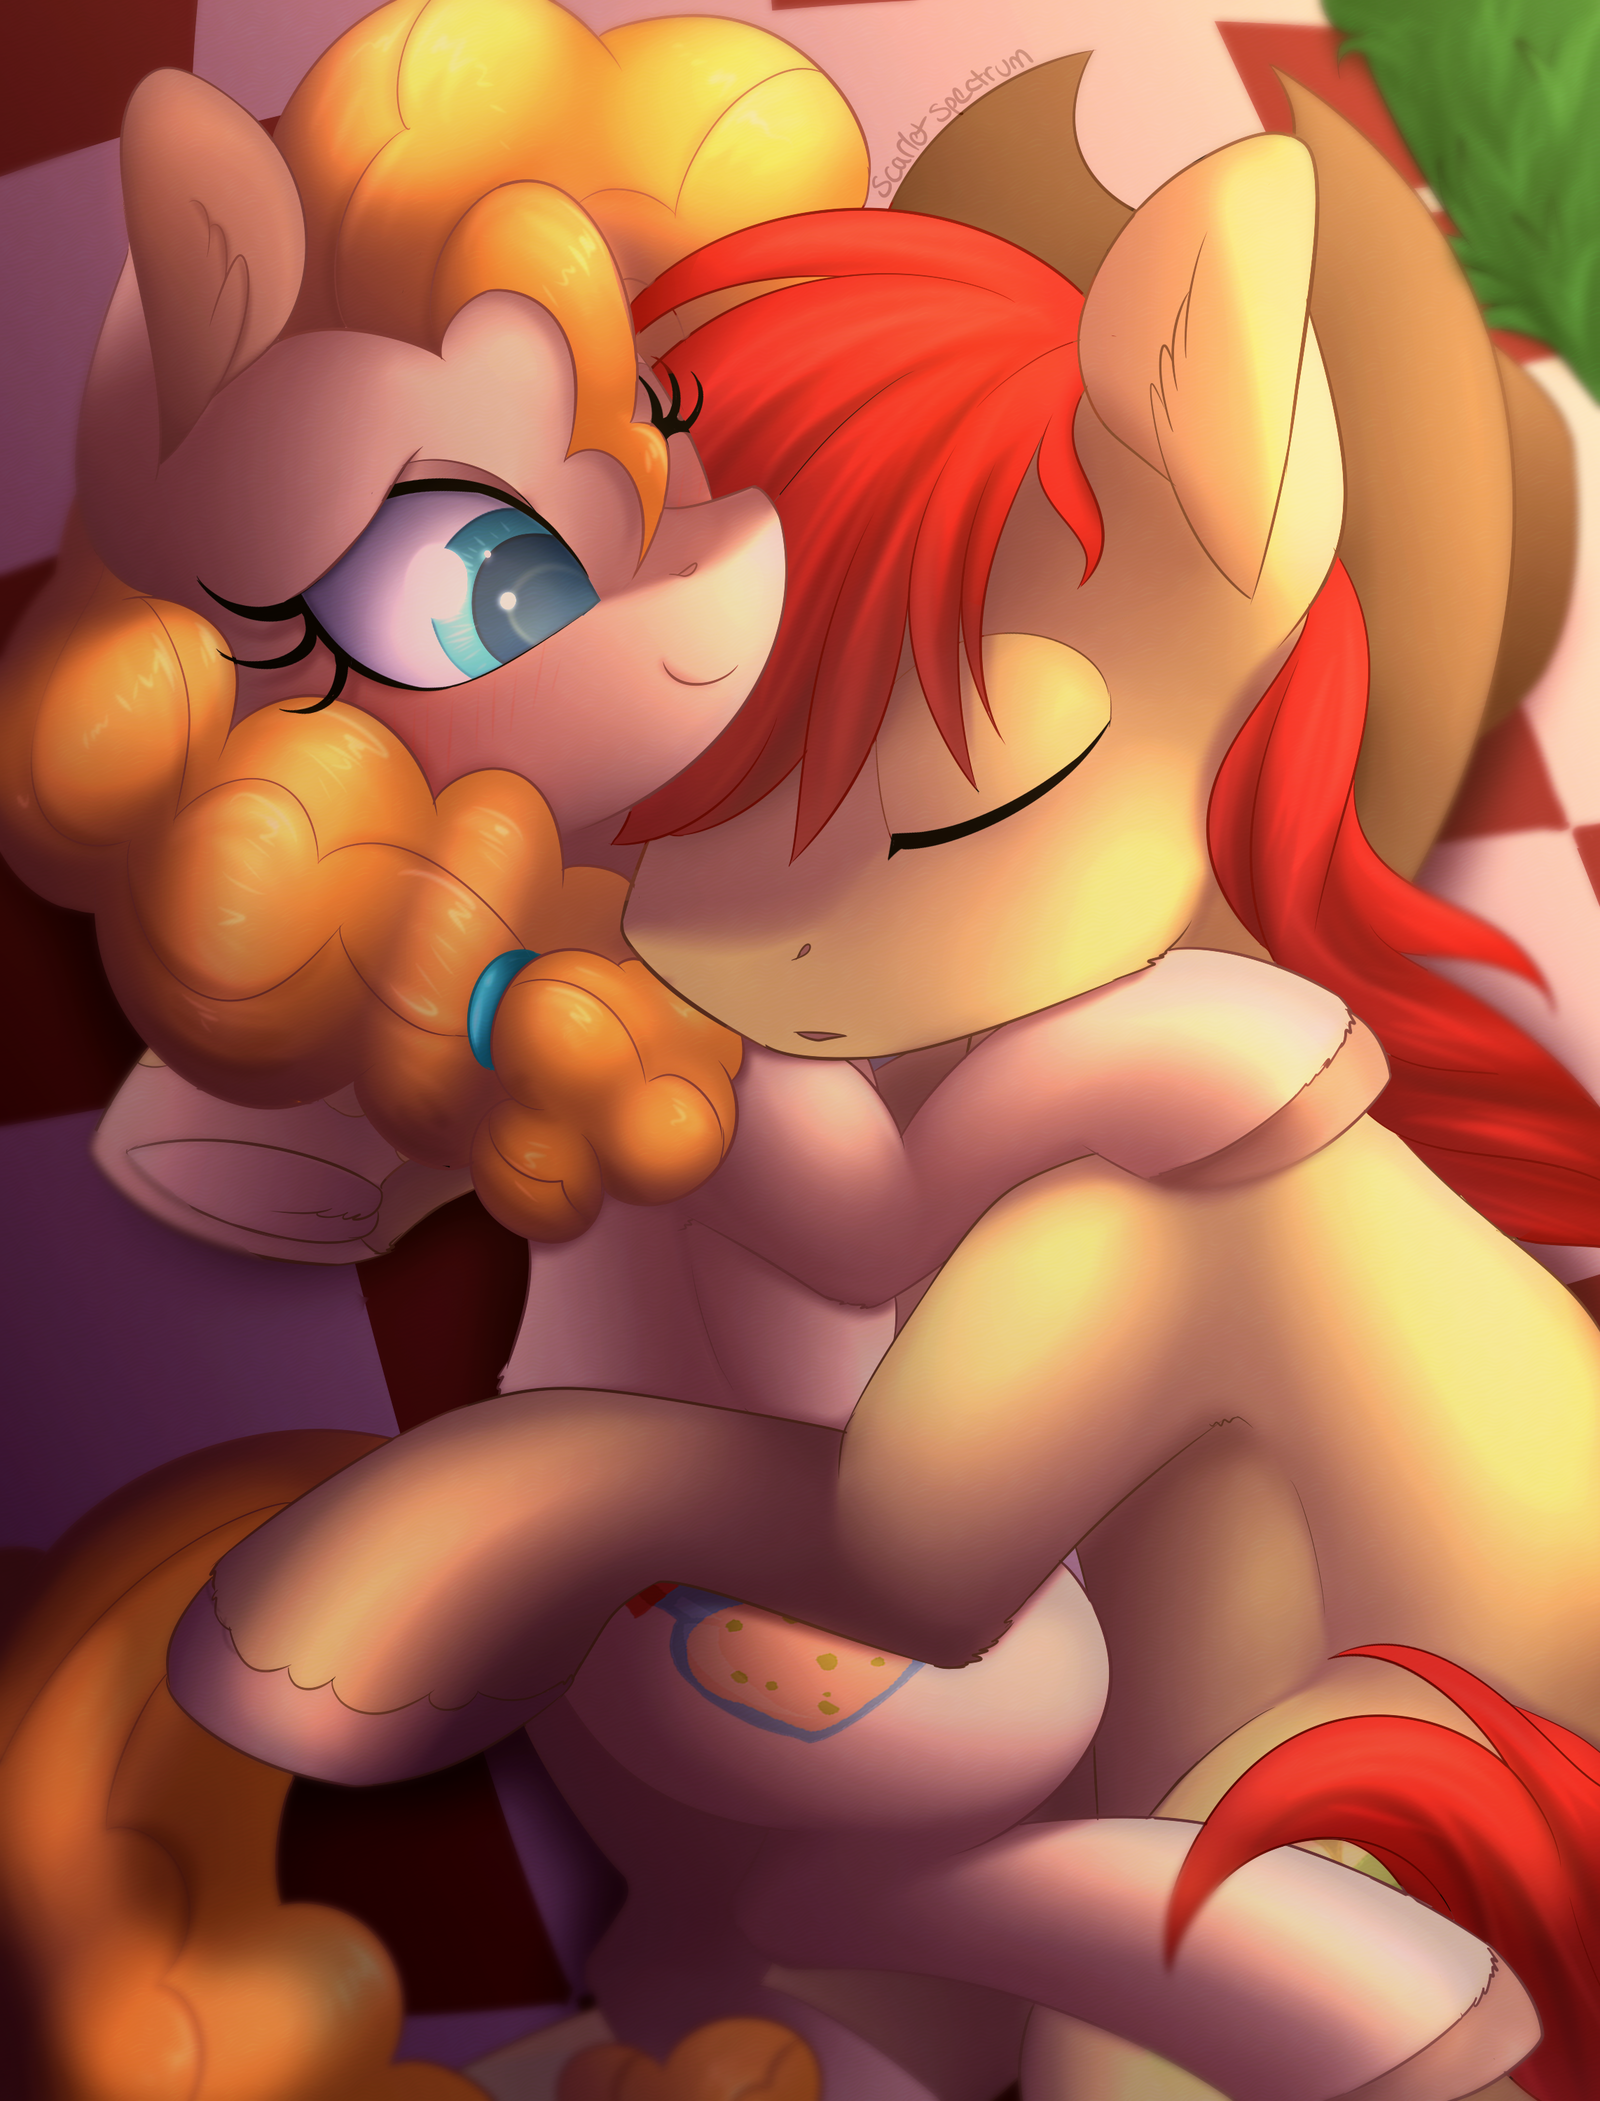 Bright Mac and Pear Butter - My little pony, PonyArt, Bright Mac, Pear butter, MLP Season 7, Spoiler, Scarlet-Spectrum